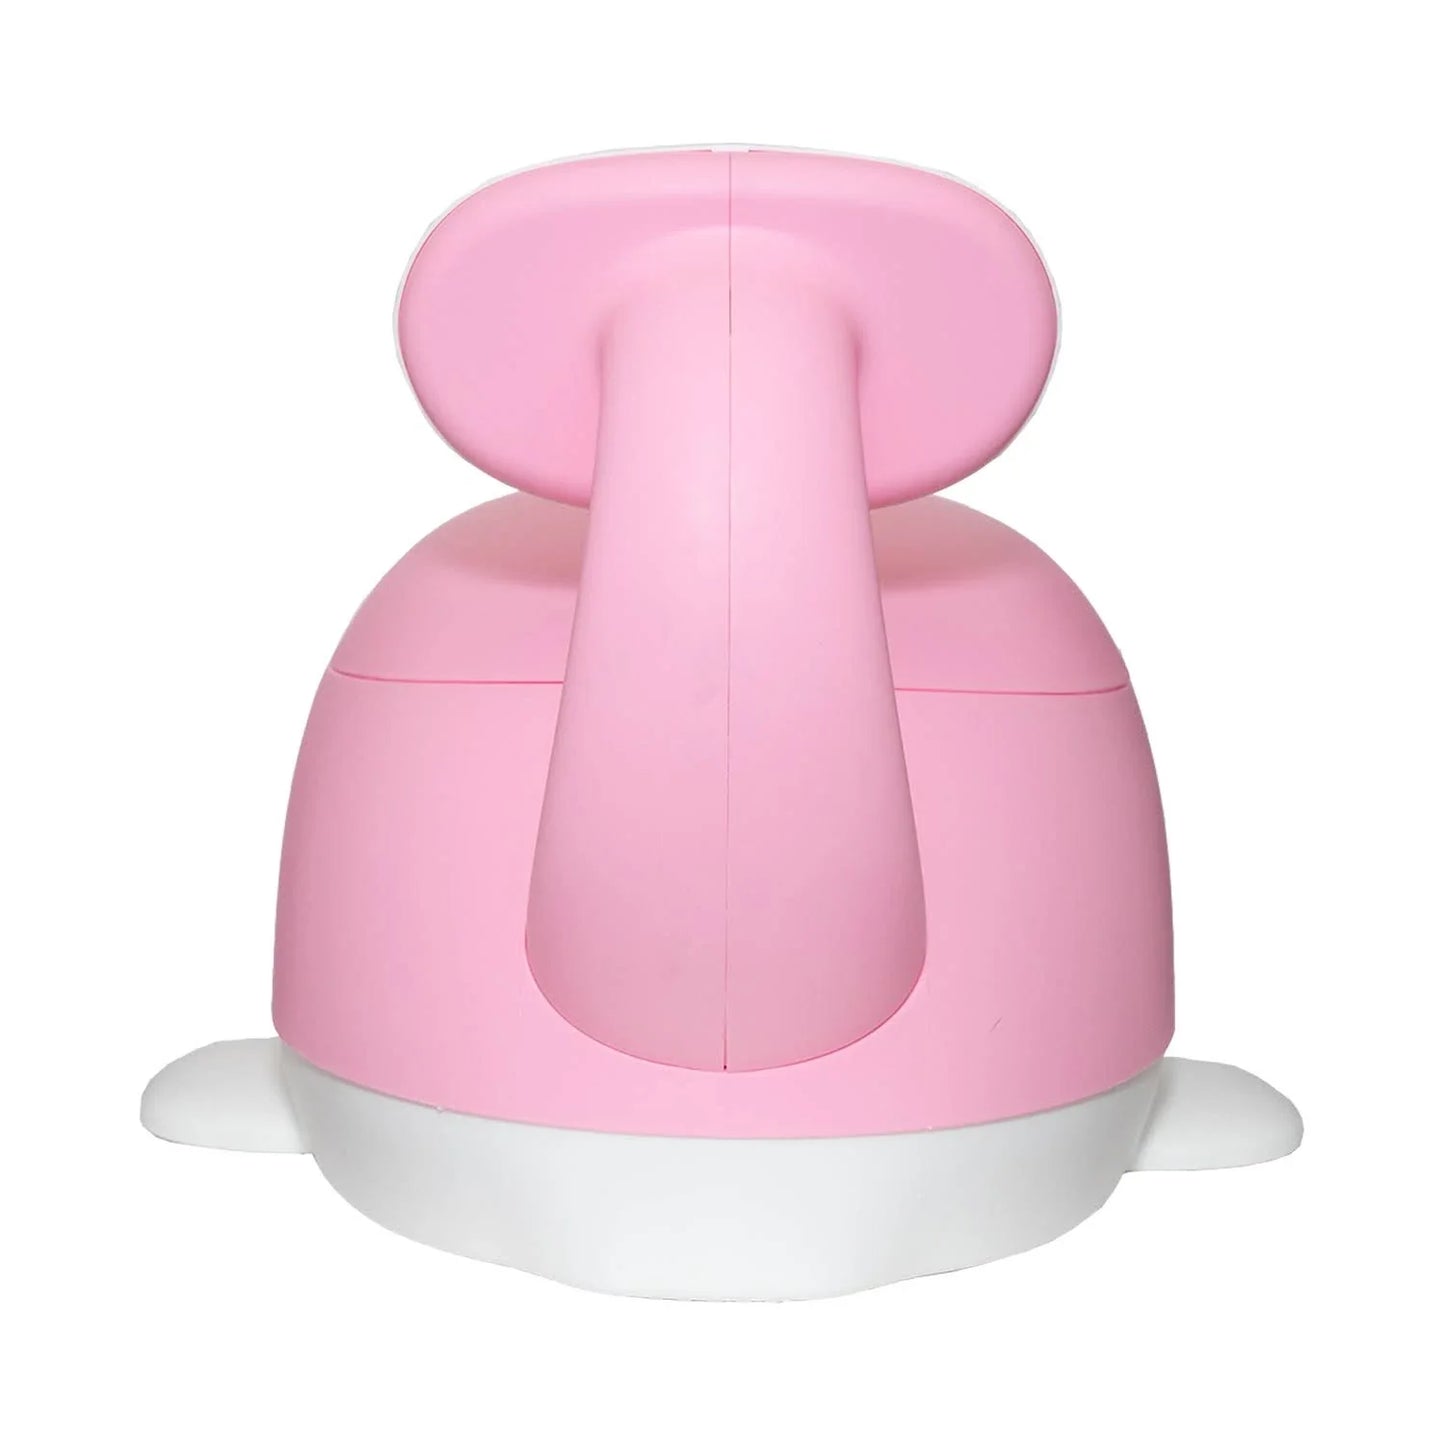 The Moby - Potty Training Seat